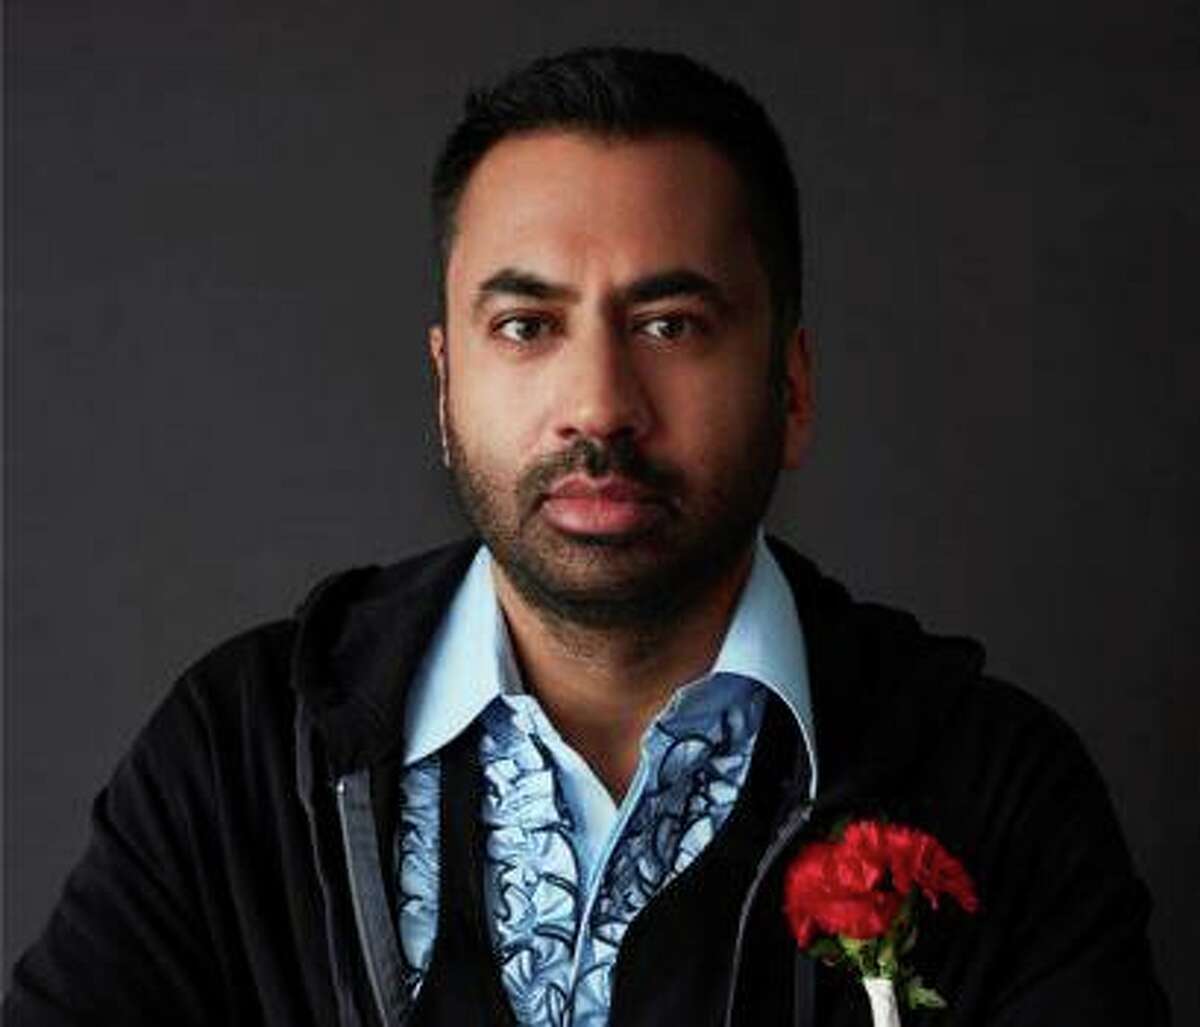 The India Cultural Center will welcome actor, writer and former Obama White House staffer Kal Penn on Tuesday, March 8, at the Greenwich High School Performing Arts Center. He will give a talk to launch the new ICC Speaker Series that will showcase the impact of South Asian Americans in the U.S. and the world.